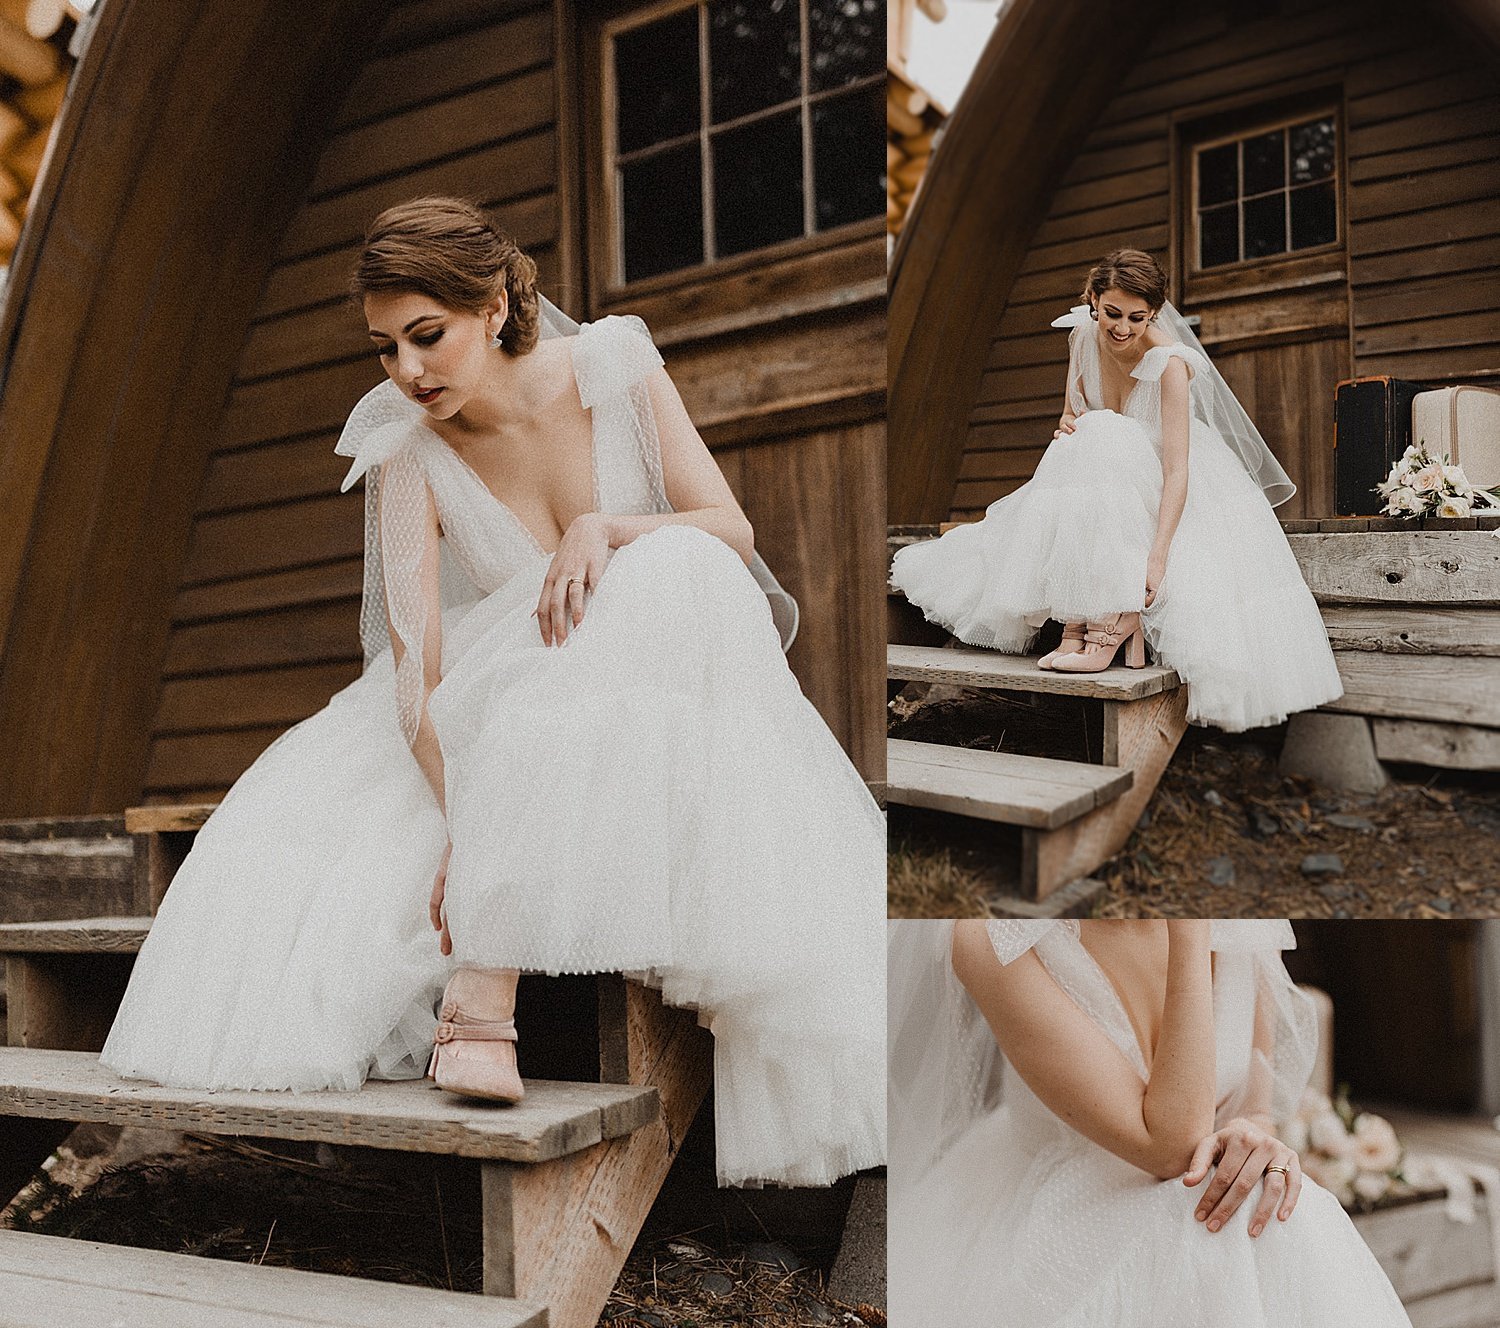  Detail shots of a bride adjusting shoe, sitting on rustic porch in vintage inspired shoot 